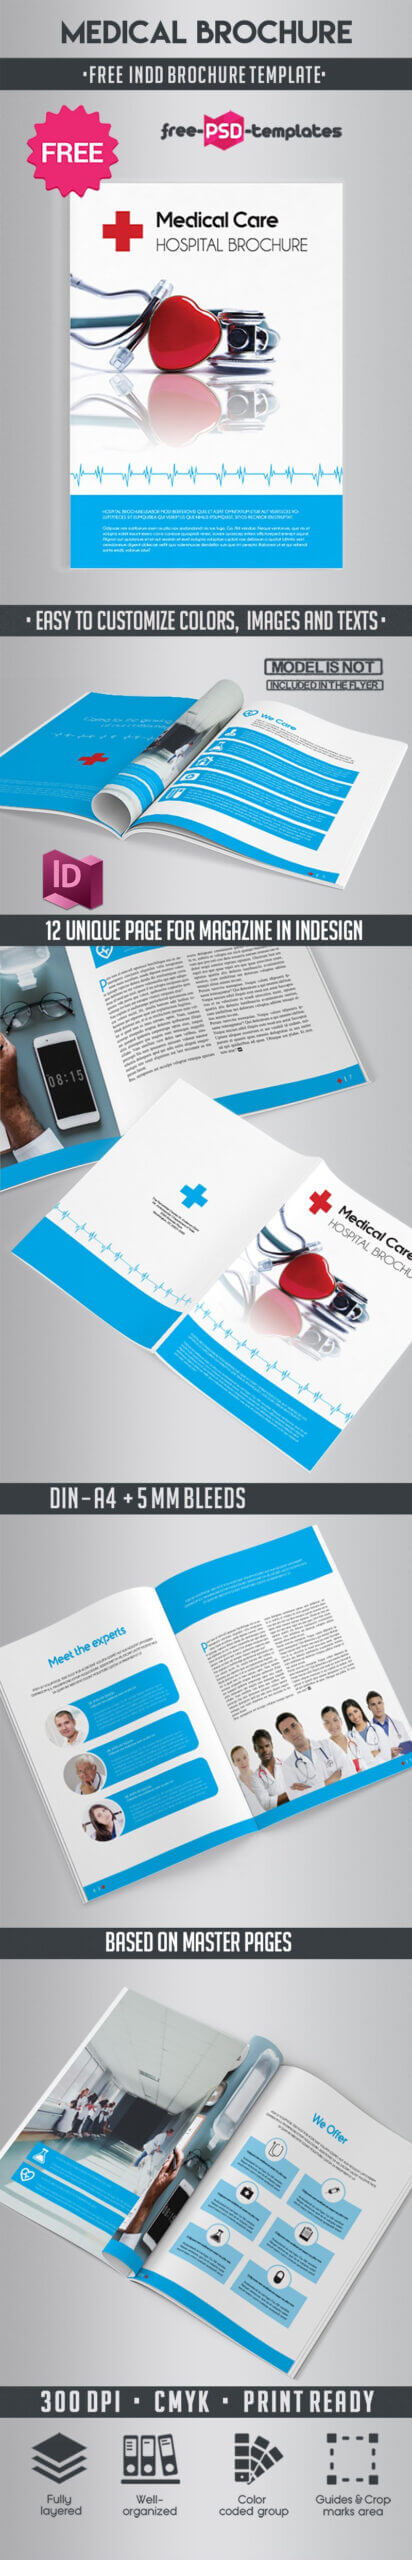 free-medical-brochure-indd-template-free-psd-templates-for-brochure